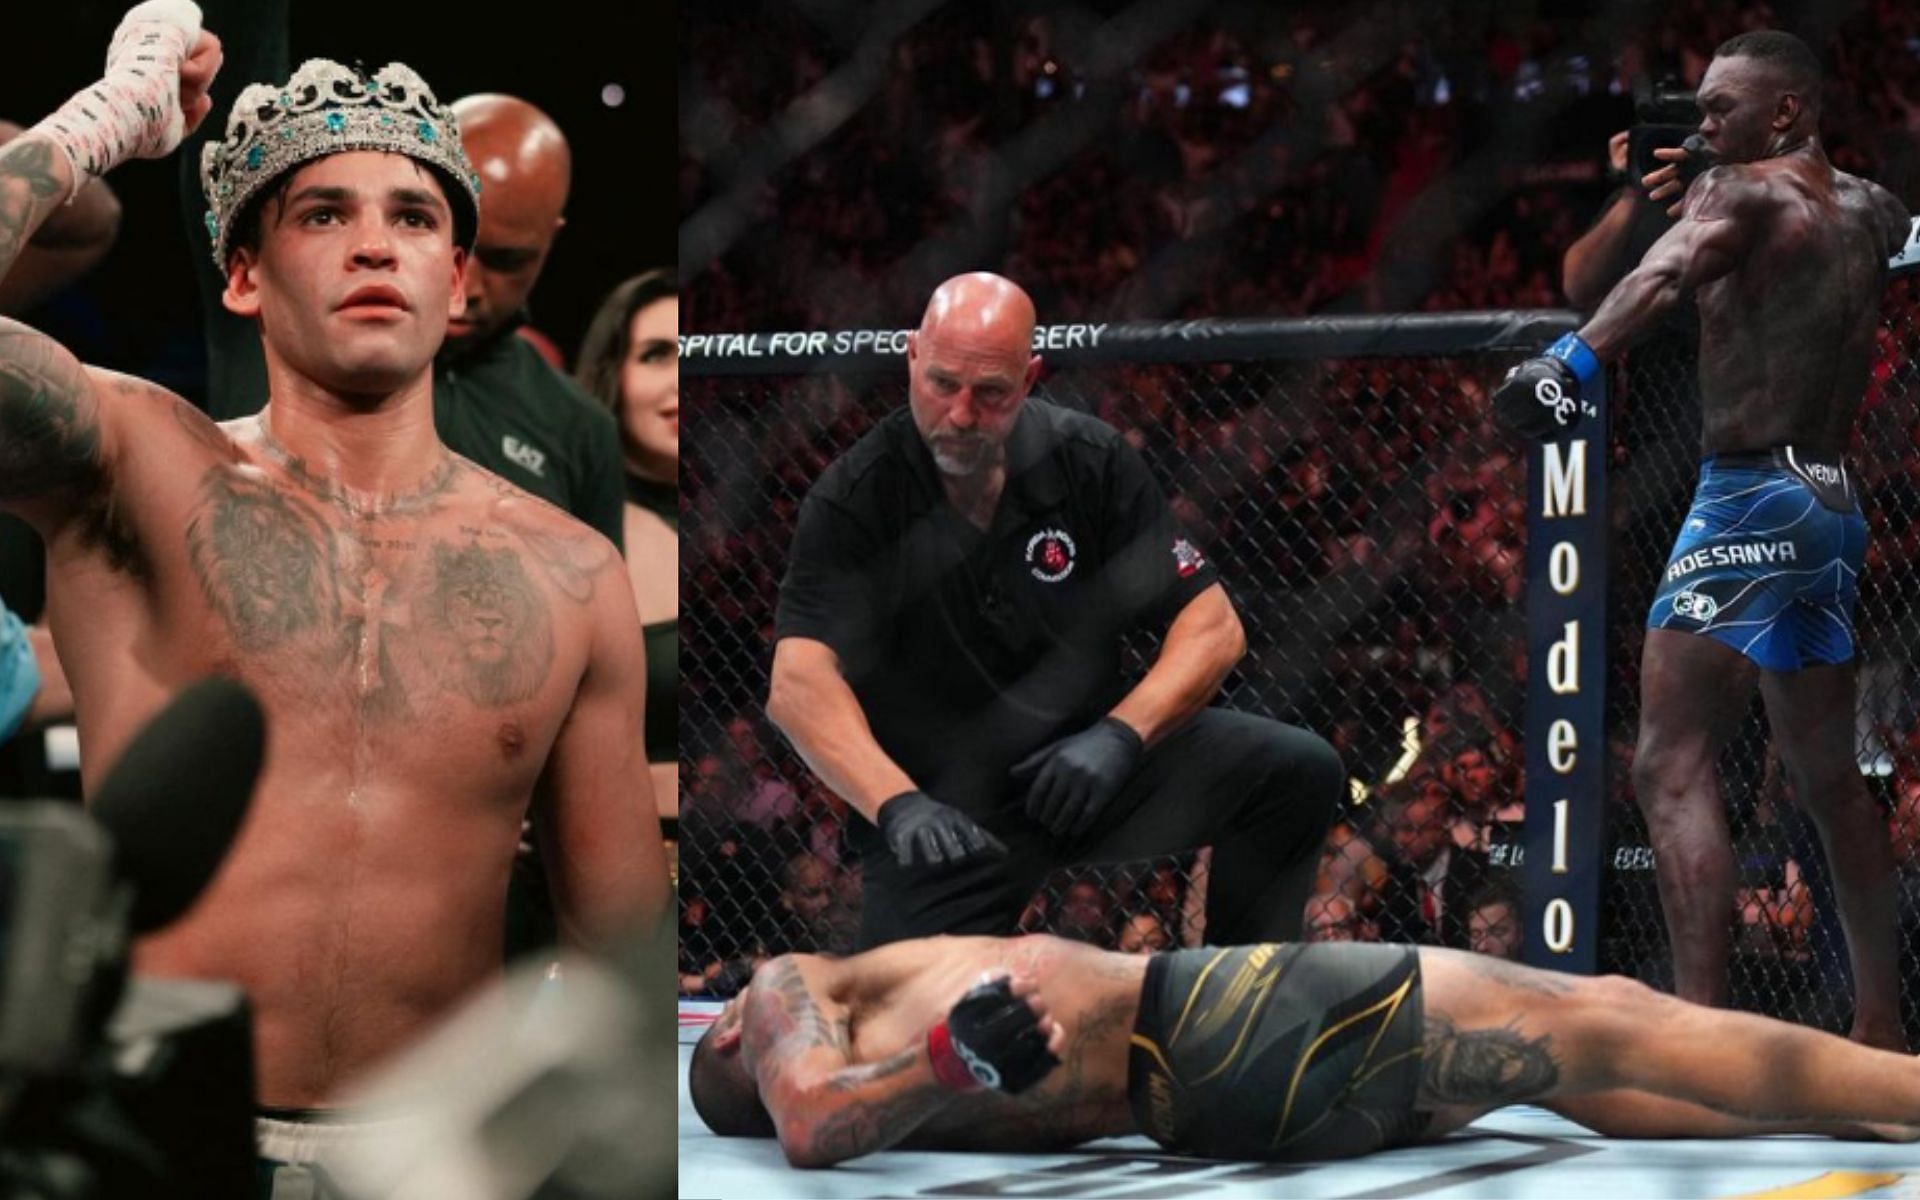 When Ryan Garcia (left) shares his thoughts on Israel Adesanya